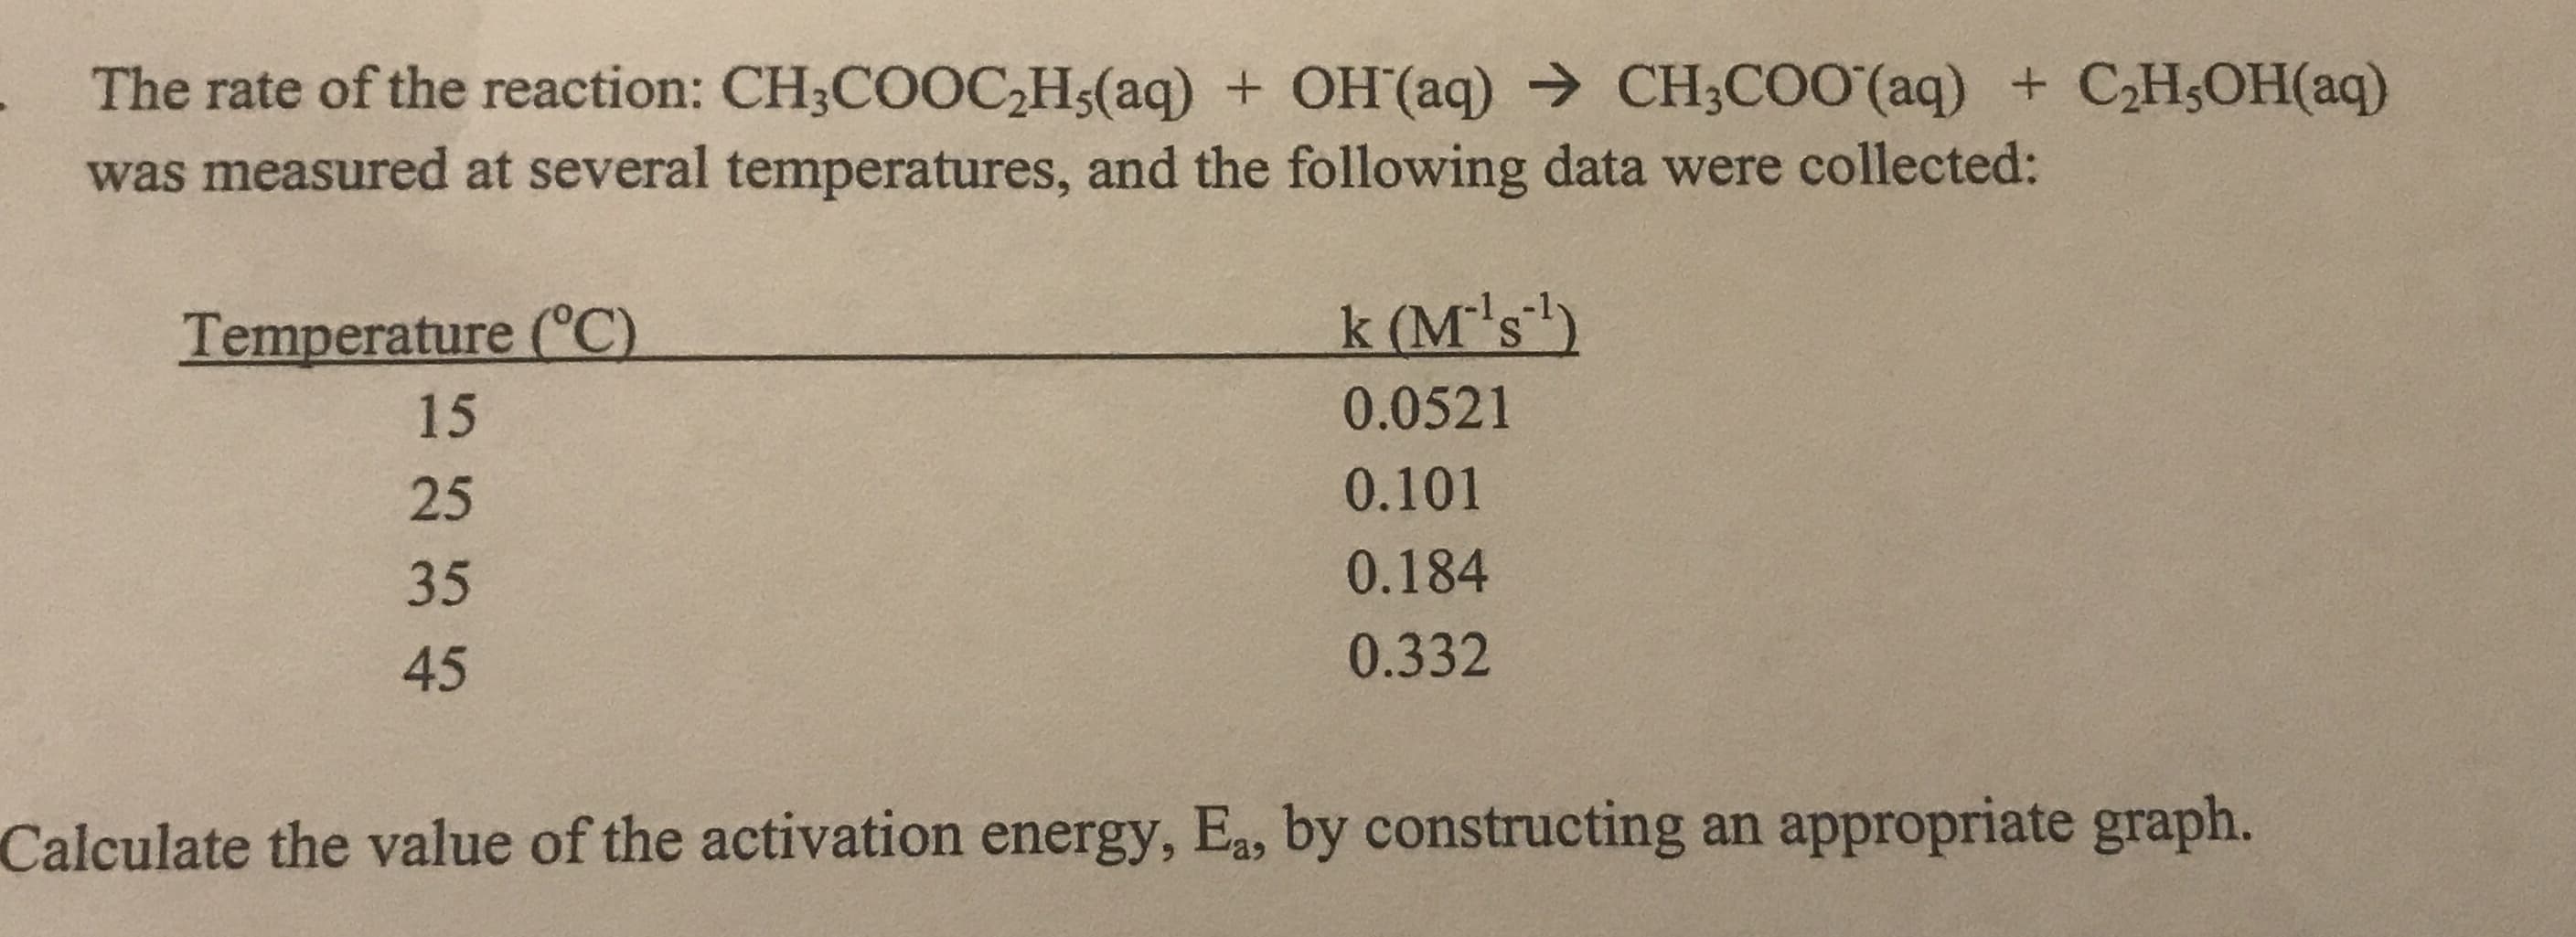 The rate of the reaction: CH;COOC,H5(aq) + OH (aq) CH;COO (aq) + CH;OH(aq)
was measured at several temperatures, and the following data were collected:
Temperature (°C)
k (M's')
15
0.0521
25
0.101
35
0.184
45
0.332
Calculate the value of the activation energy, Ea, by constructing an appropriate graph.
